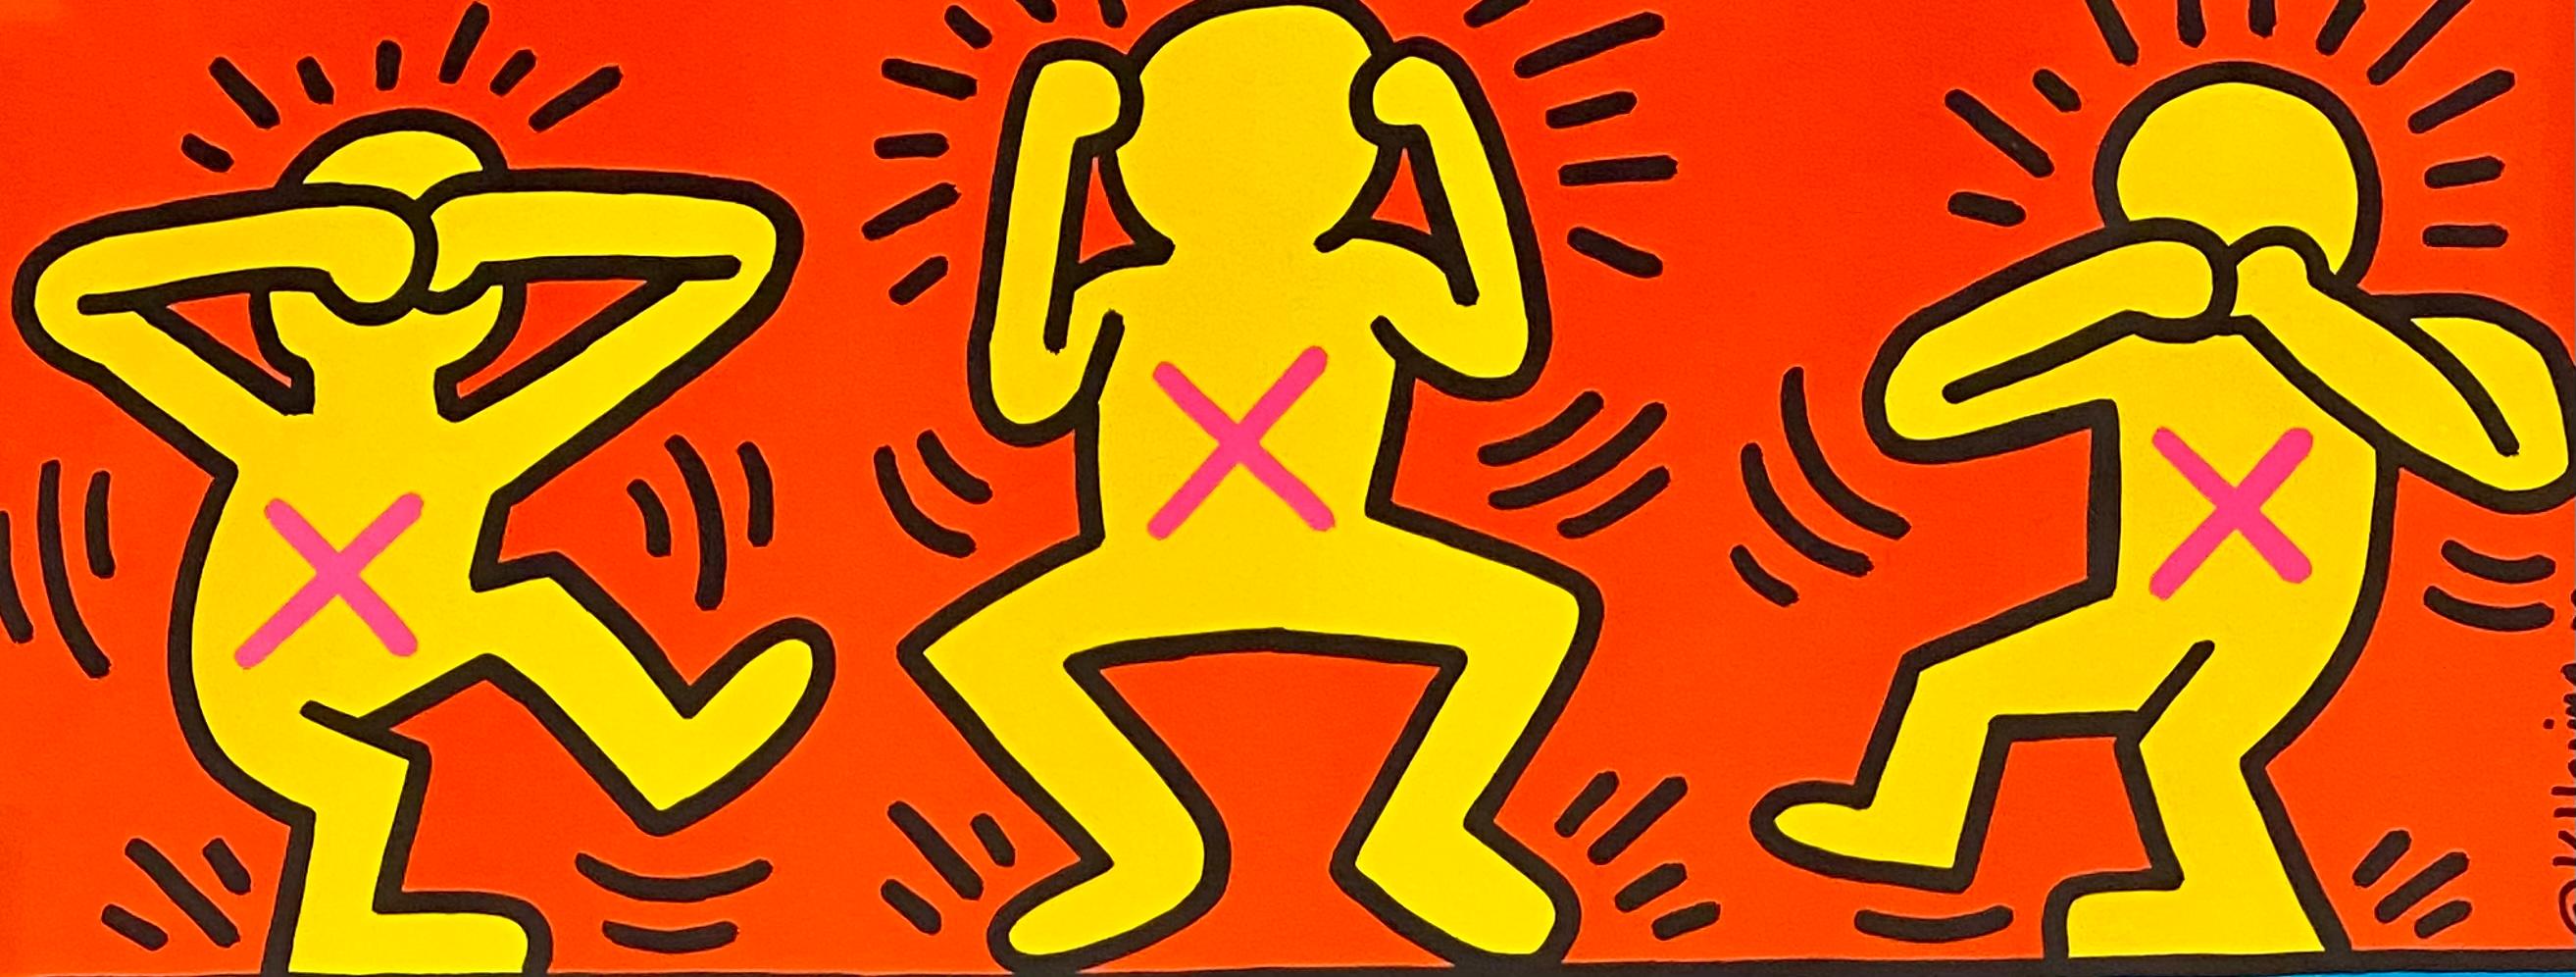 After Keith Haring Ignorance = Fear, 1989 (Keith Haring Act Up poster) 3